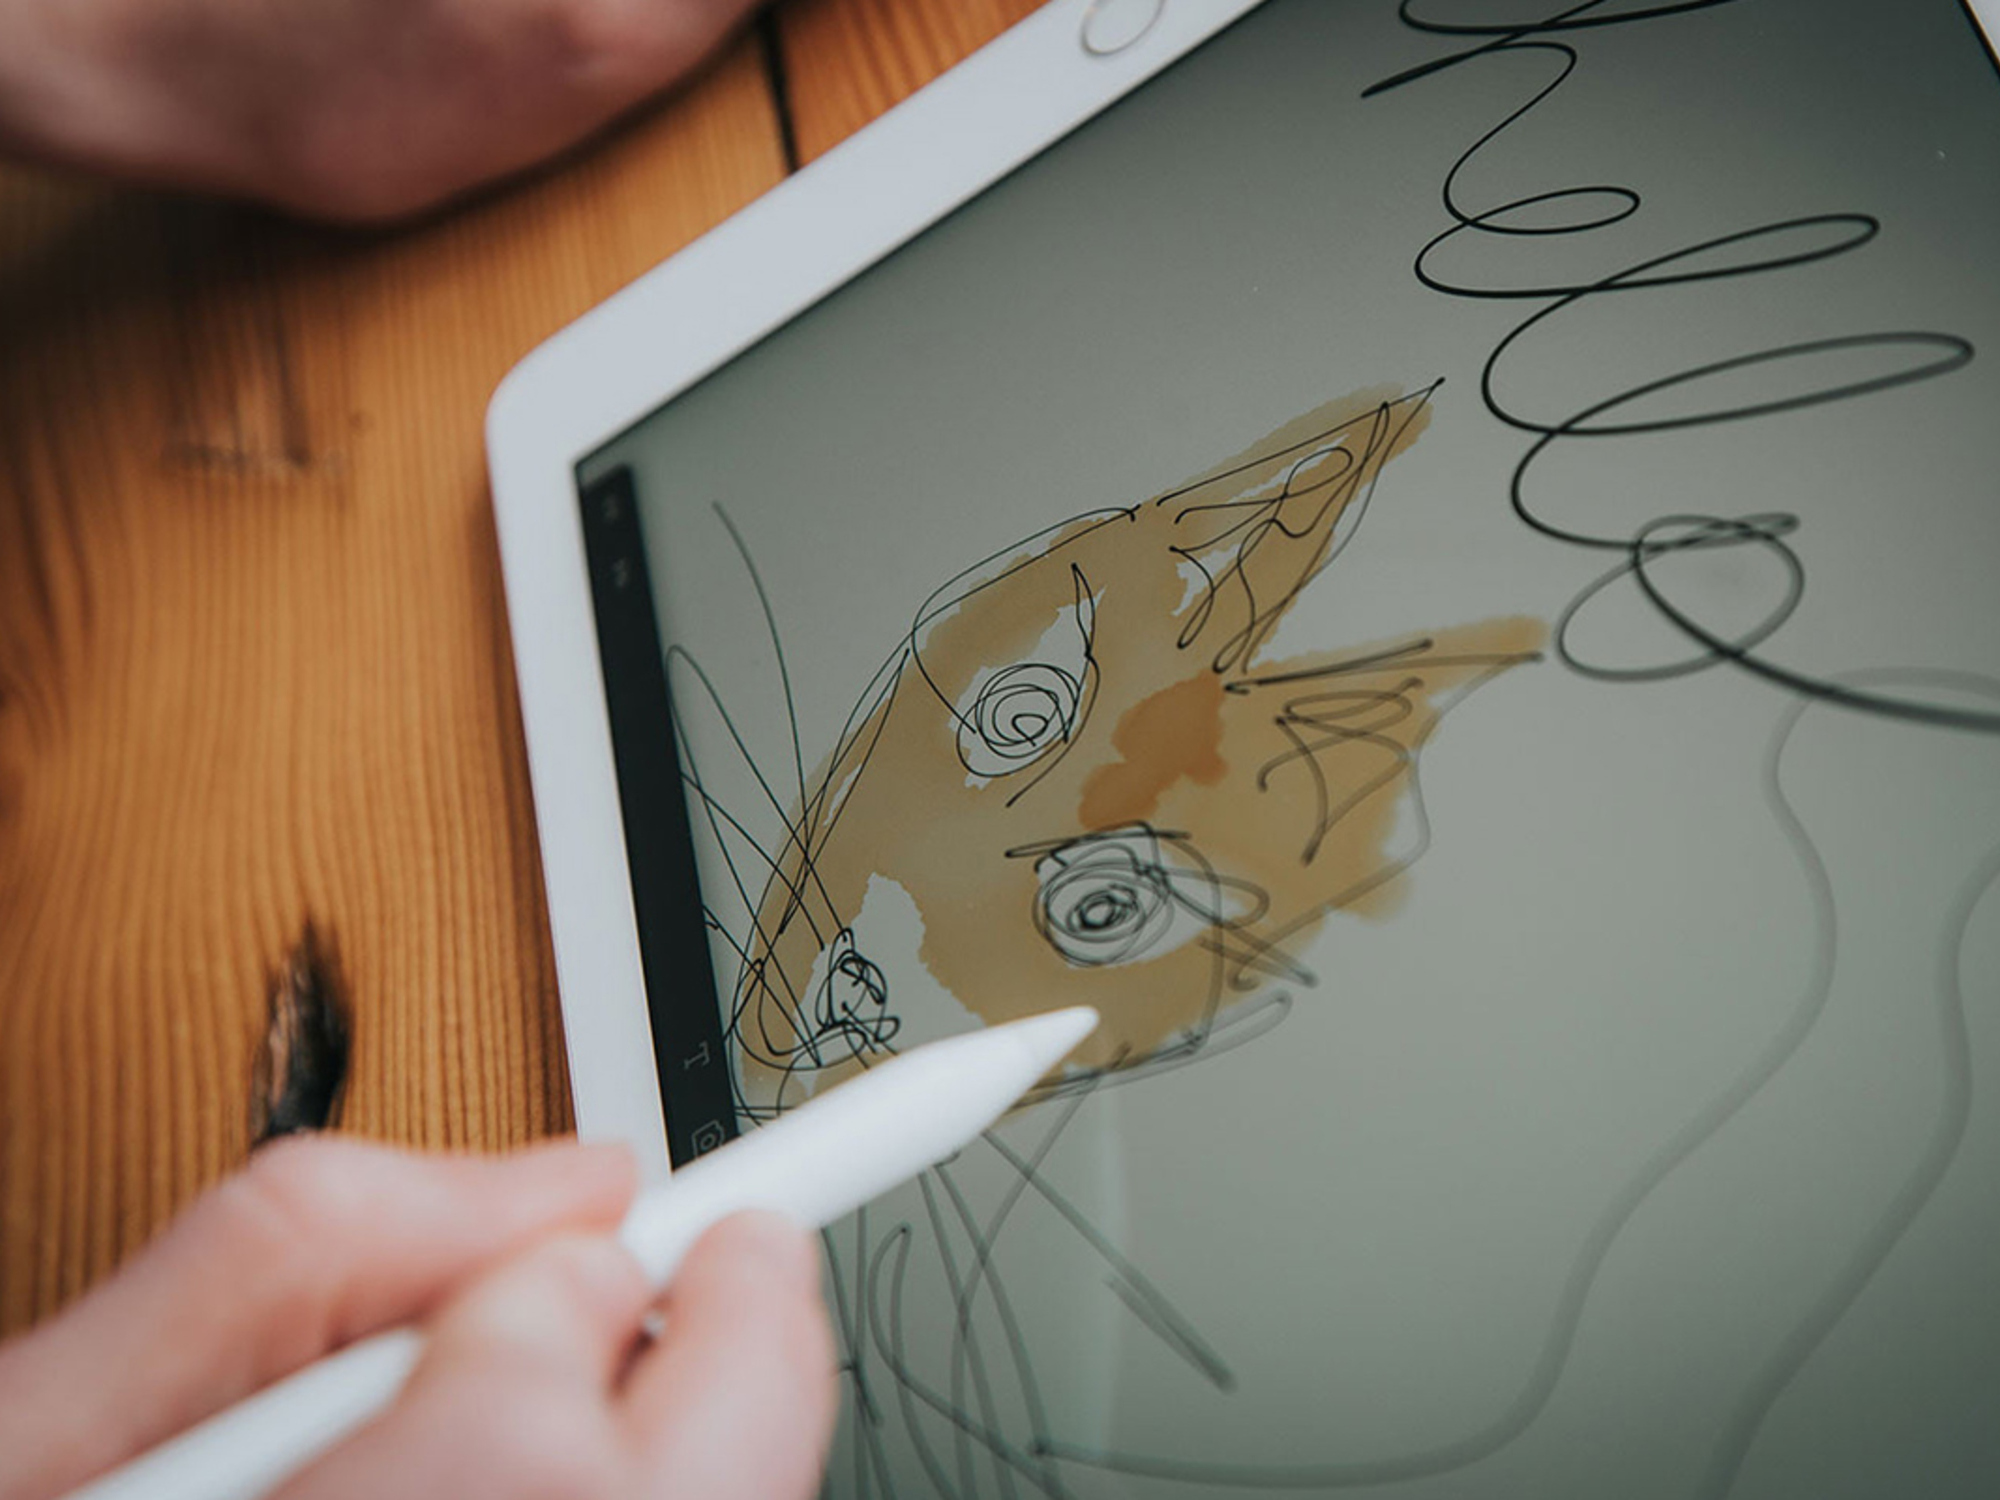 This near-mint iPad Pro is on sale for $438 off